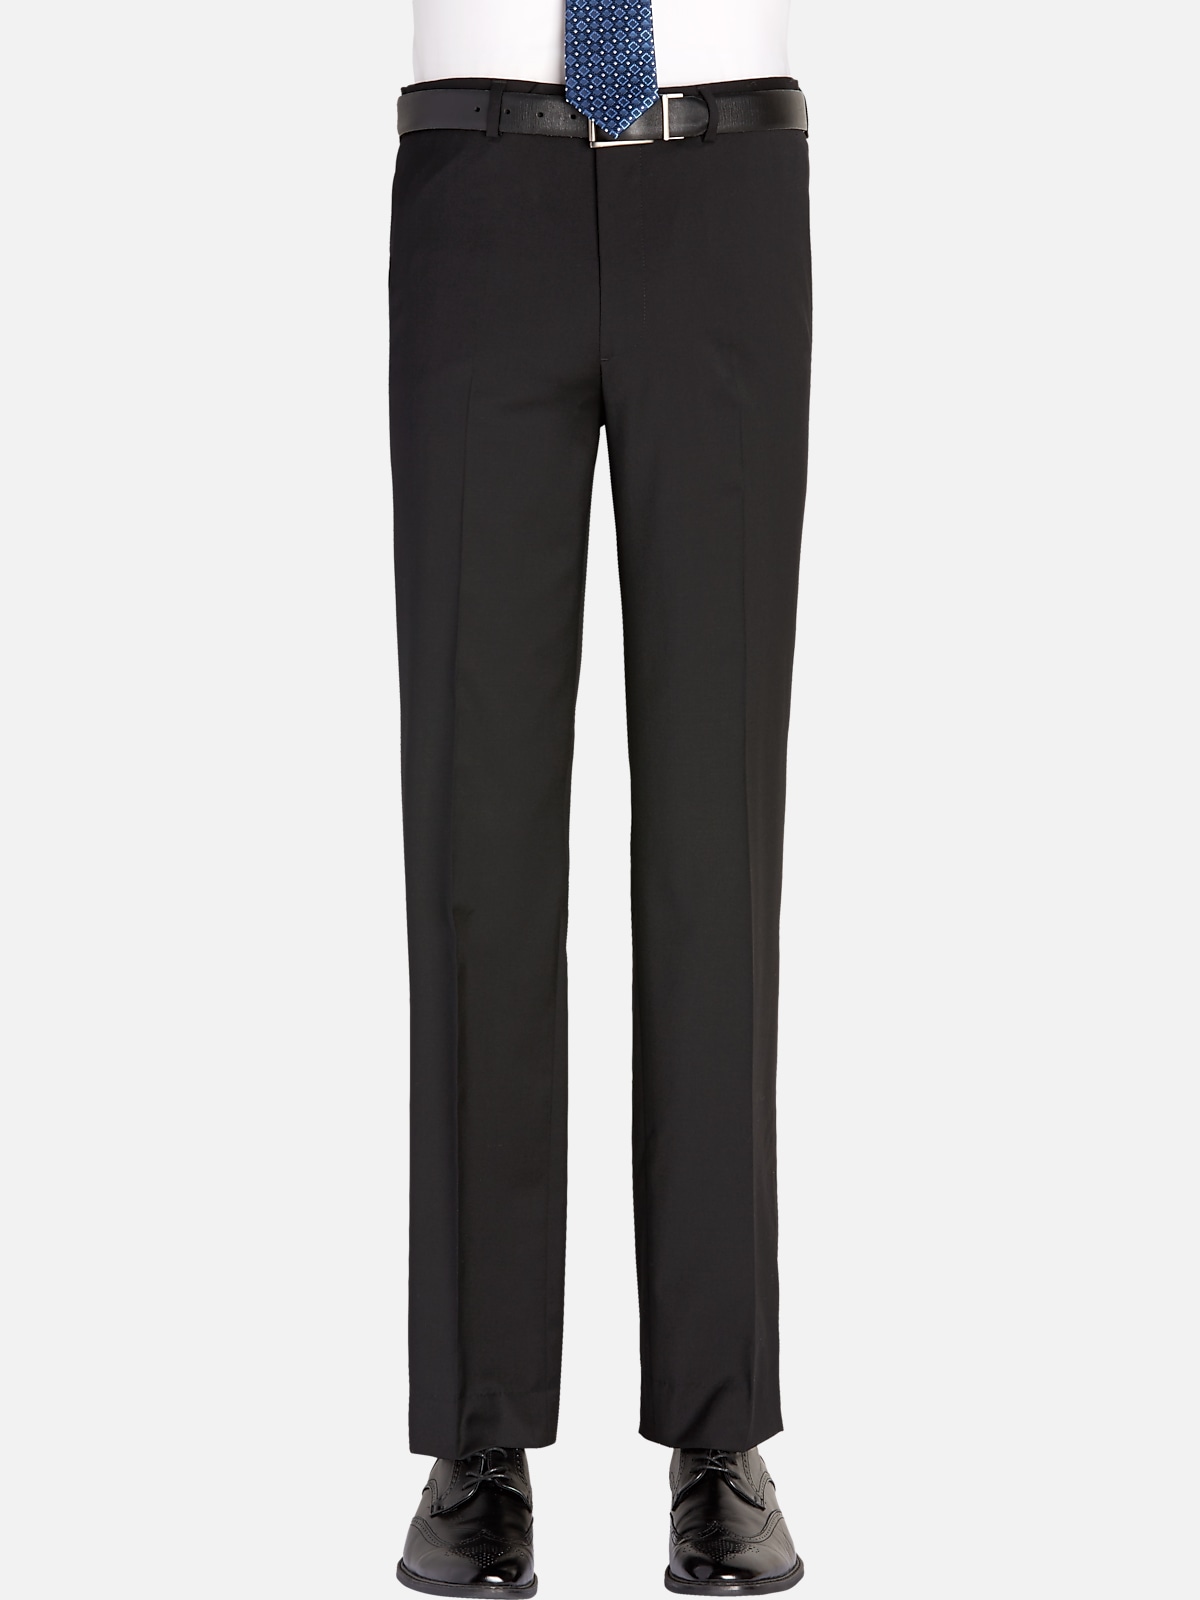 Awearness Kenneth Cole Modern Fit Suit Separates Pants